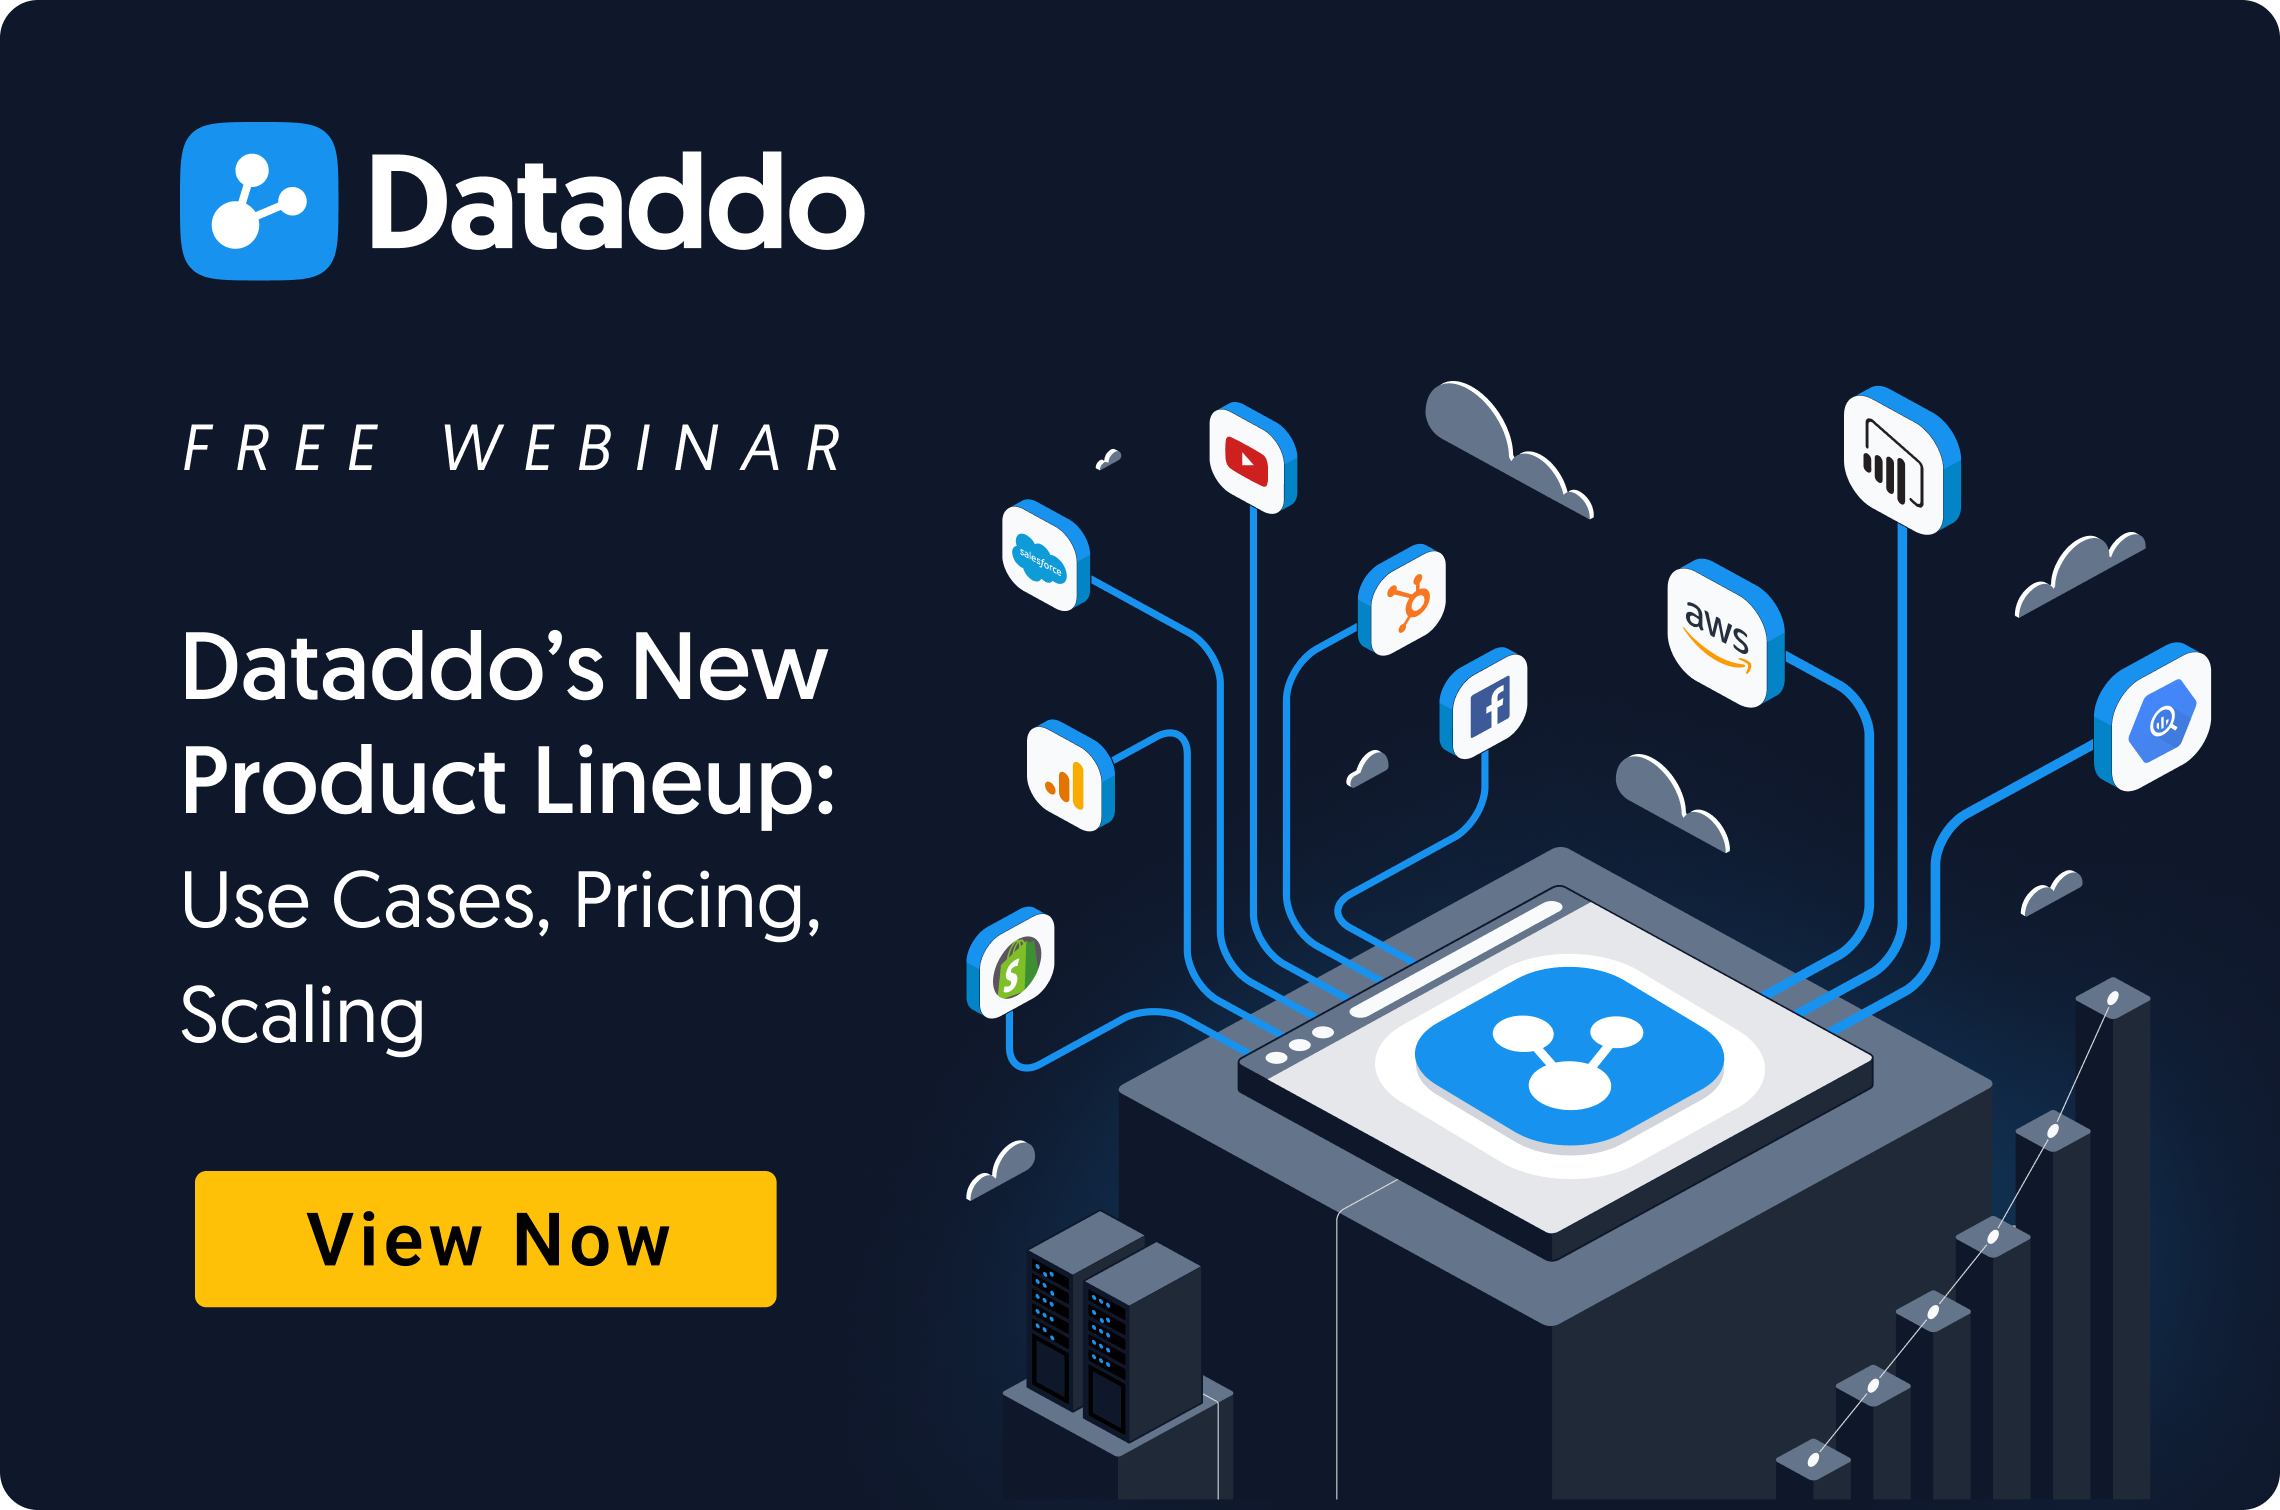 [WEBINAR] Dataddo’s New Product Lineup: Use Cases, Pricing, Scaling